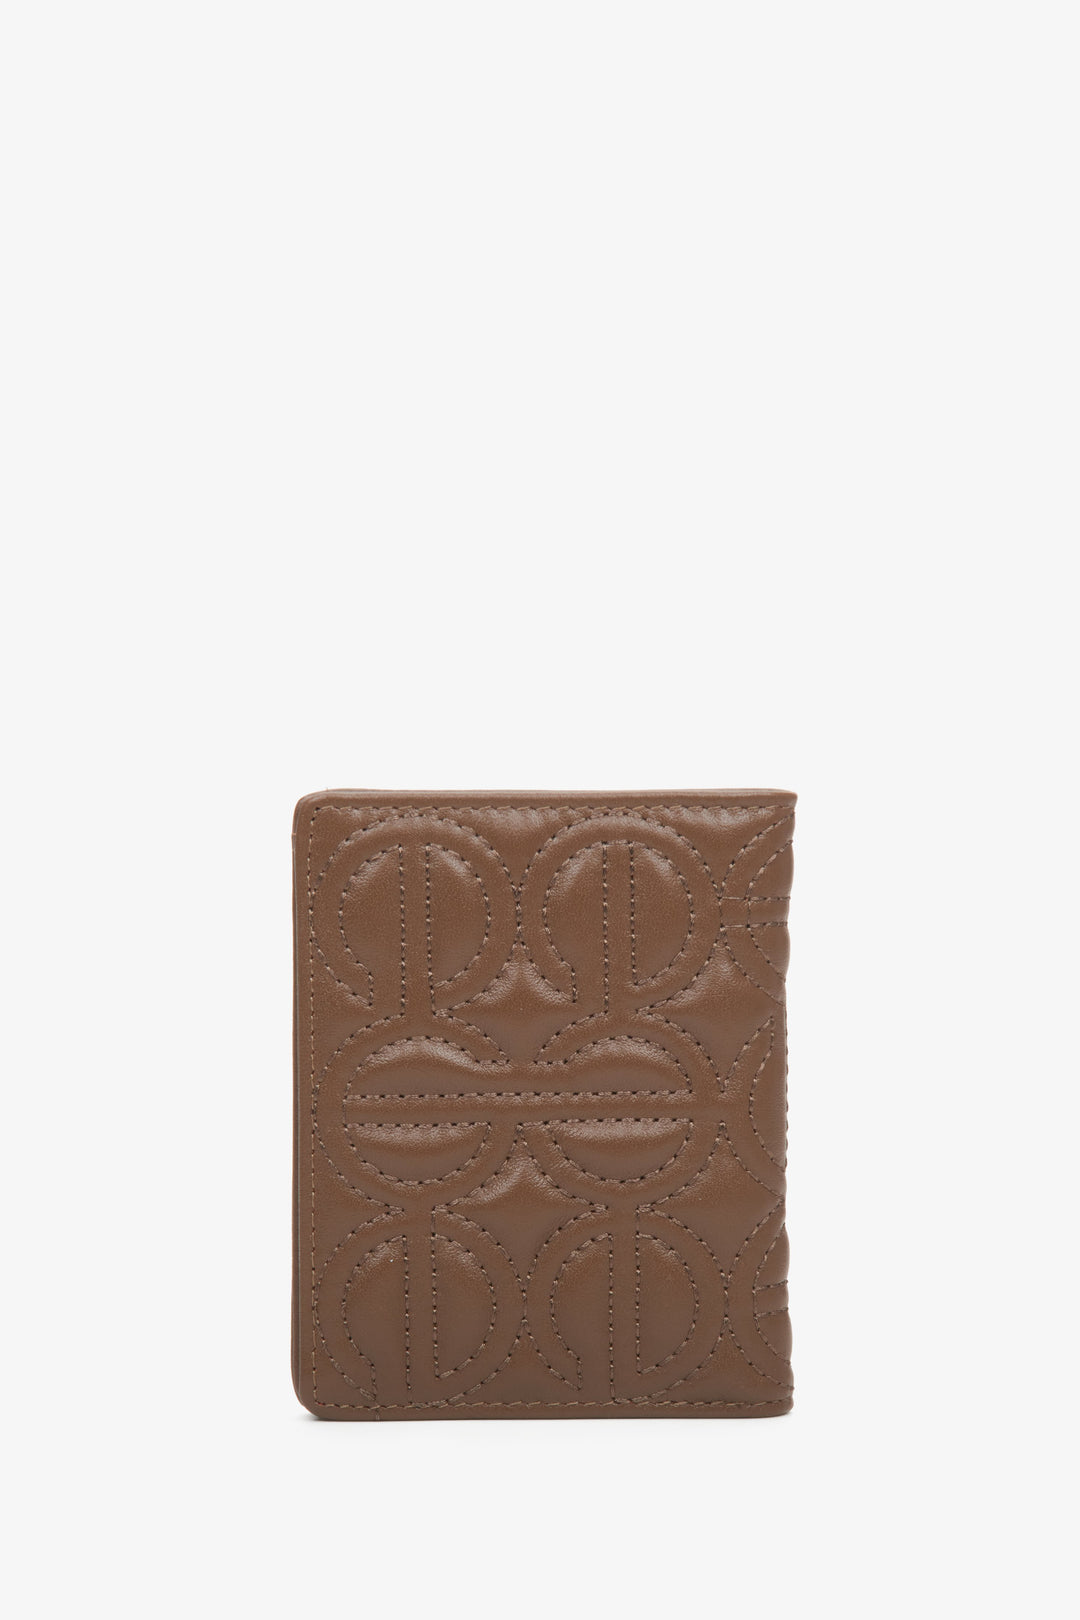 Small women's dark brown card leather wallet by Estro with embossed logo.